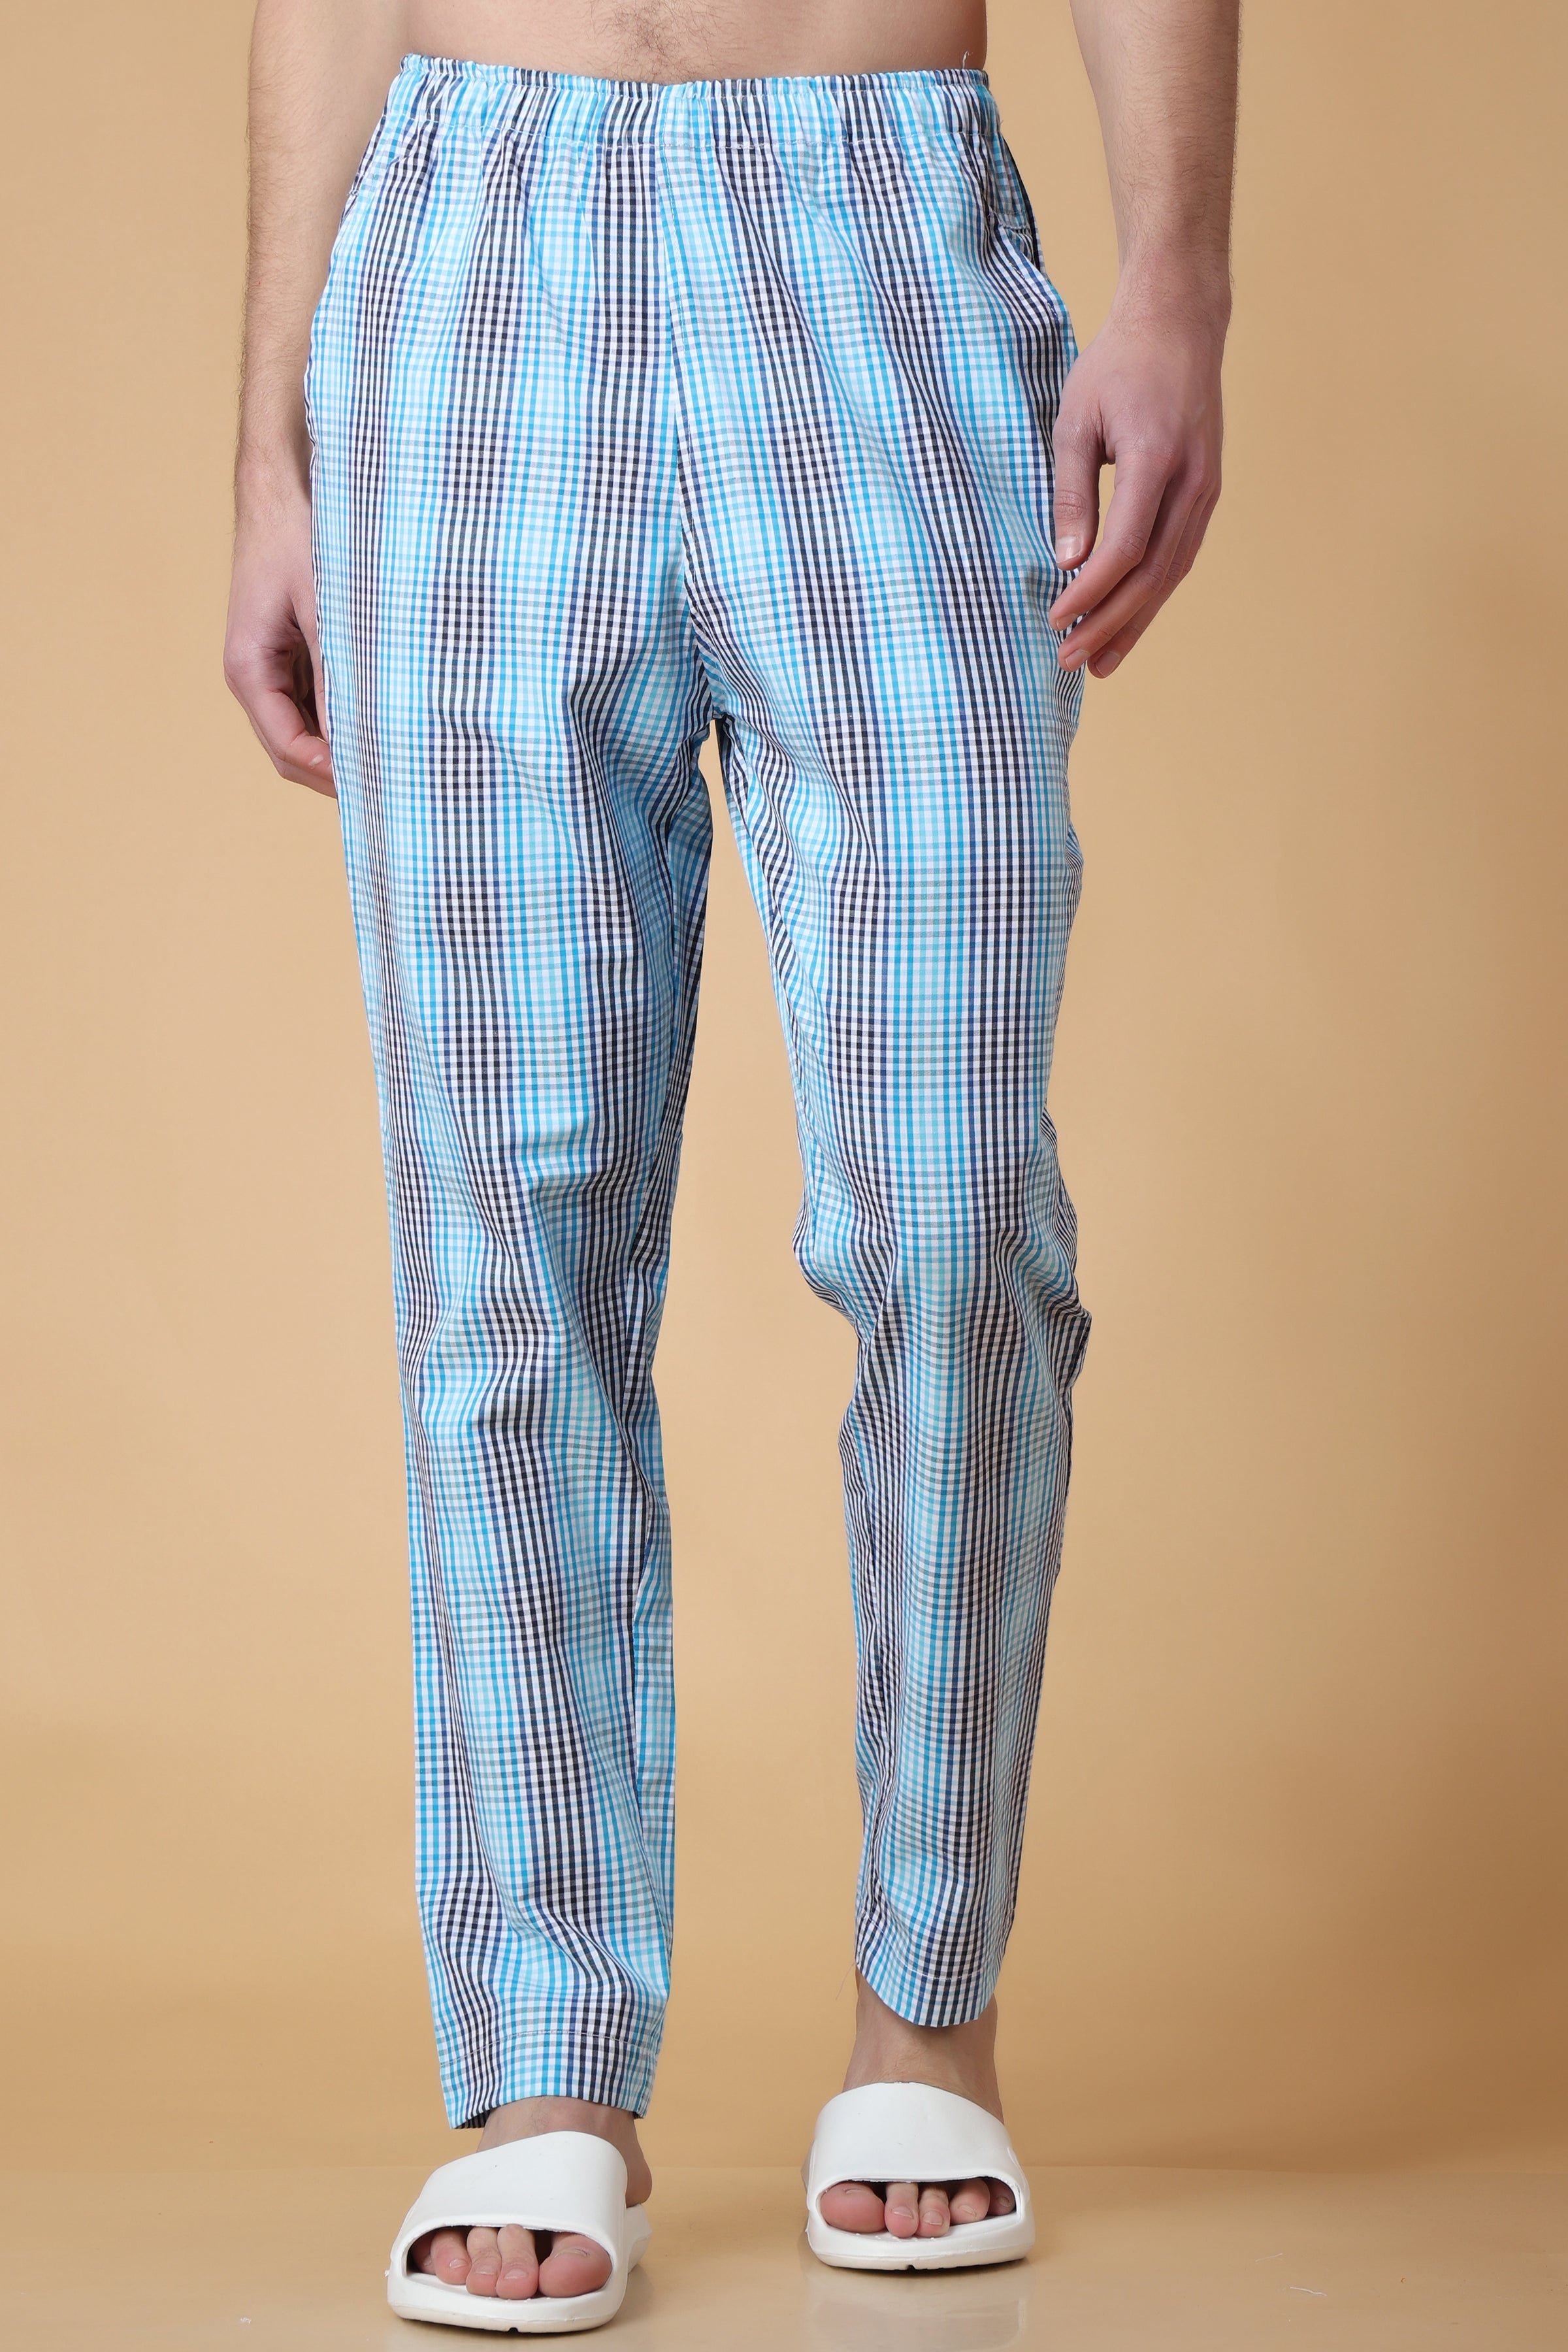 Mens Cotton Print Pajama Set Long Sleeve Plaid Cotton Sleepwear For Spring  And Autumn, Plus Size Homewear 4XL From Dou08, $38.67 | DHgate.Com | Better  Than Old Navy.